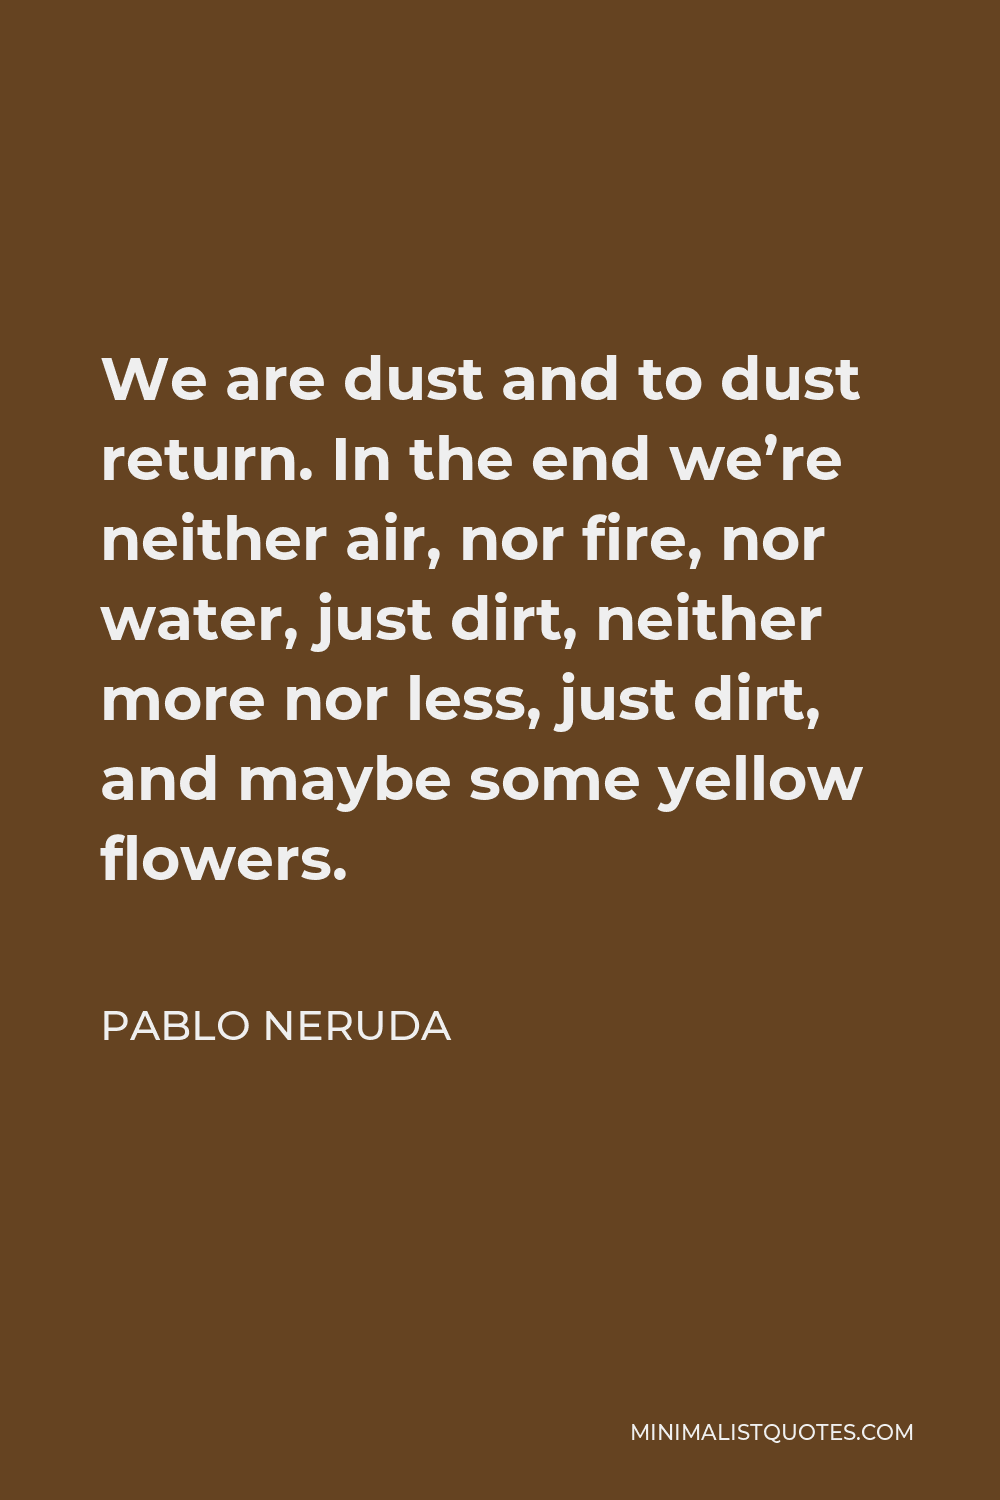 Pablo Neruda Quote - We are dust and to dust return. In the end we’re neither air, nor fire, nor water, just dirt, neither more nor less, just dirt, and maybe some yellow flowers.